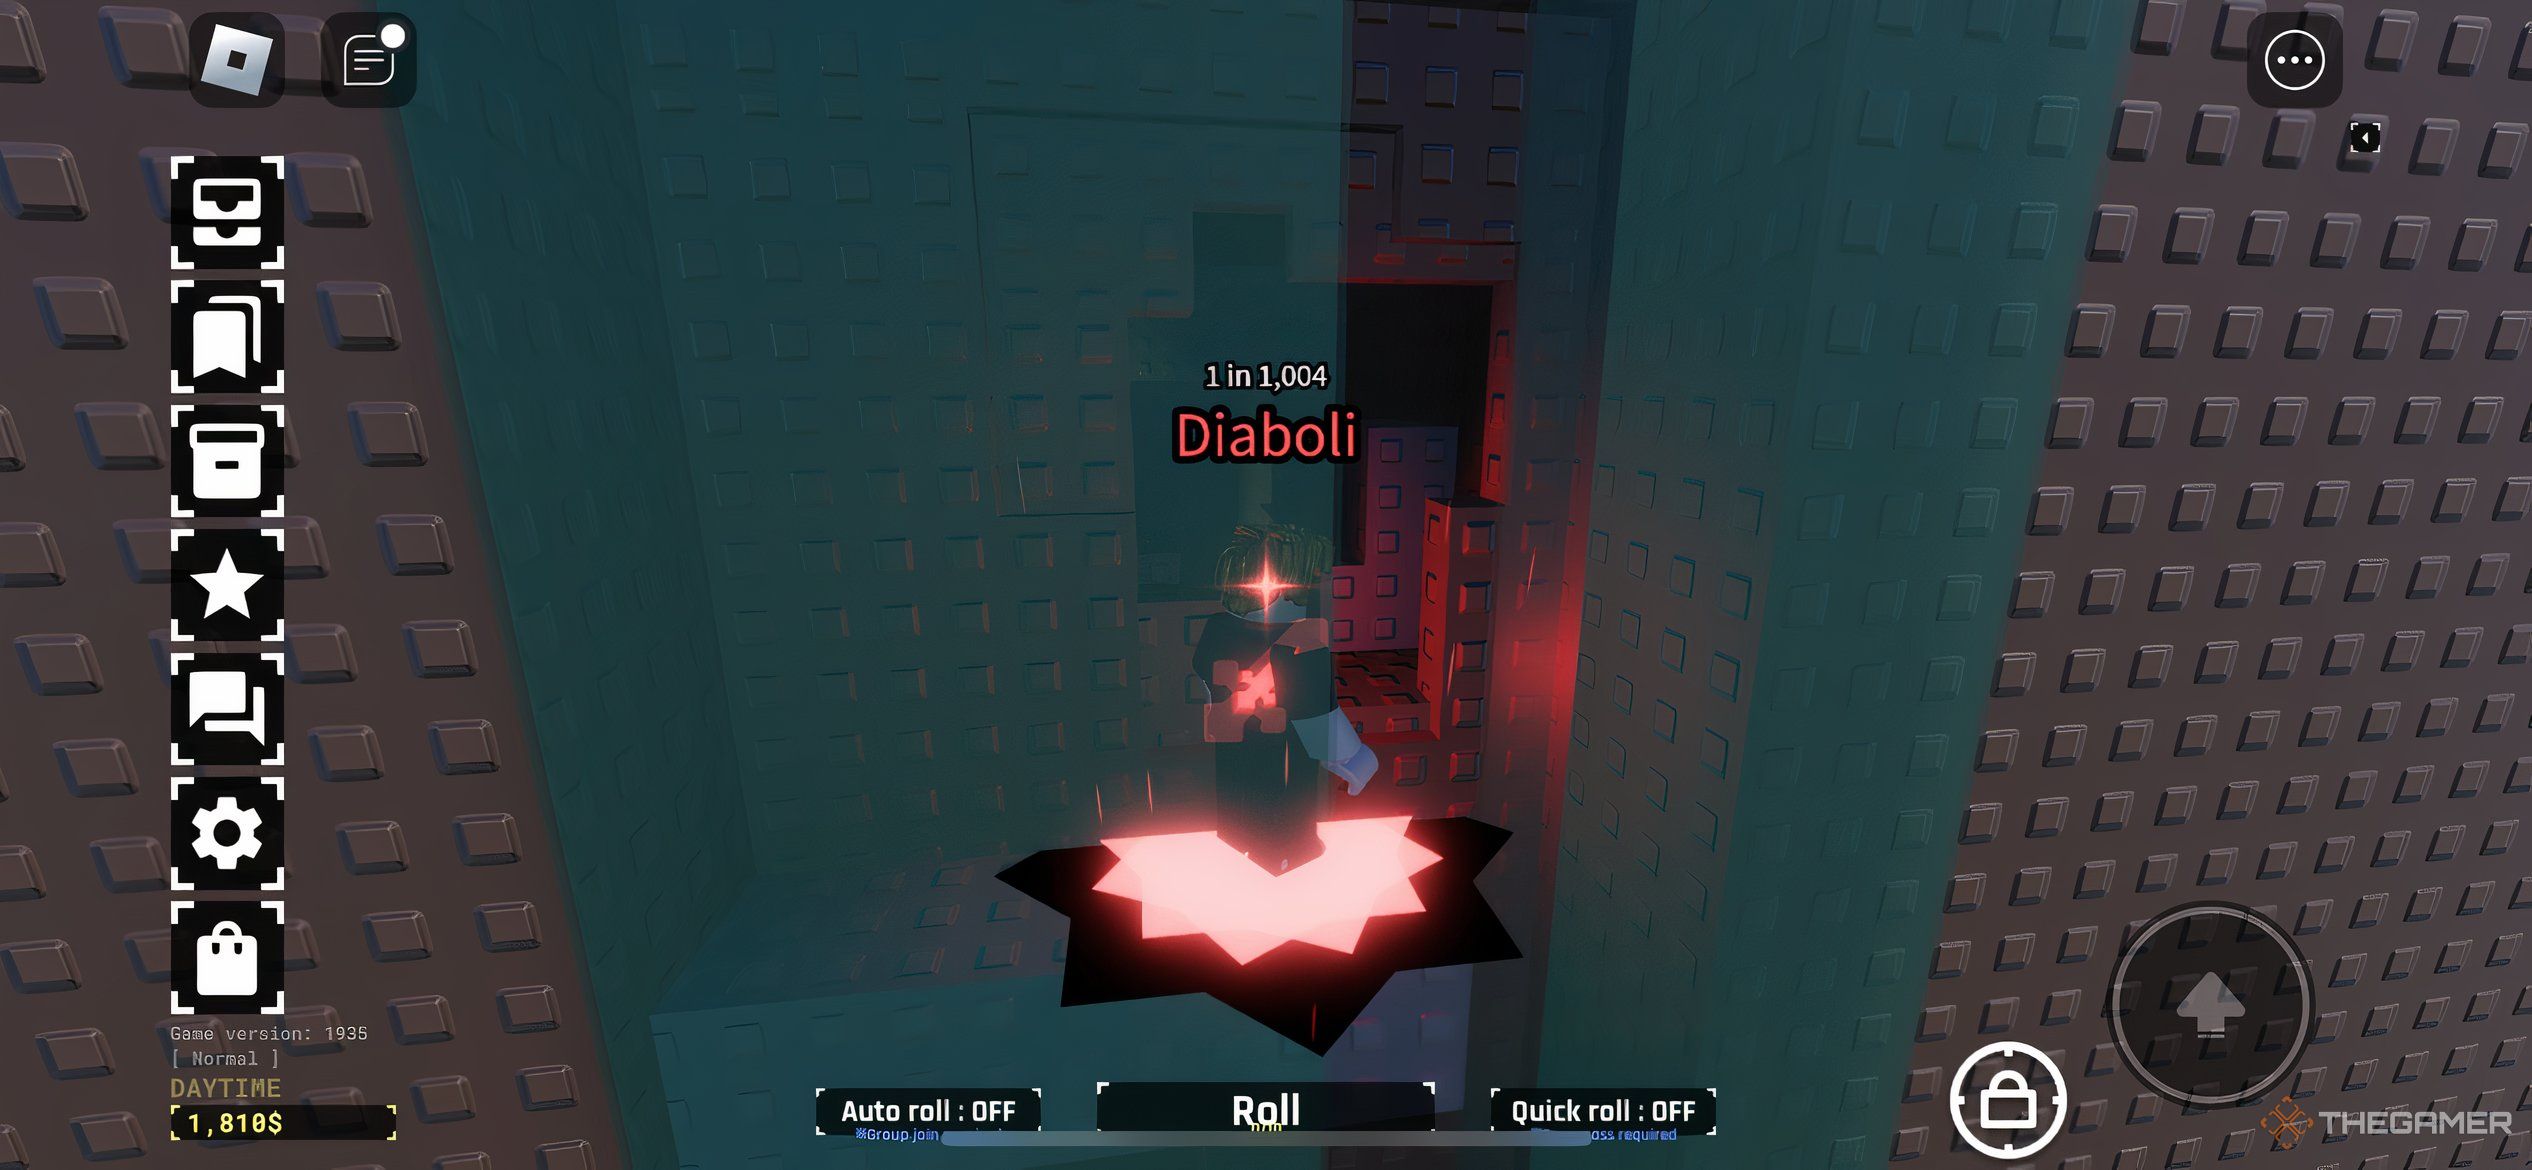 The secret cave entrance that will lead to Stella's room Roblox: Sol's RNG.